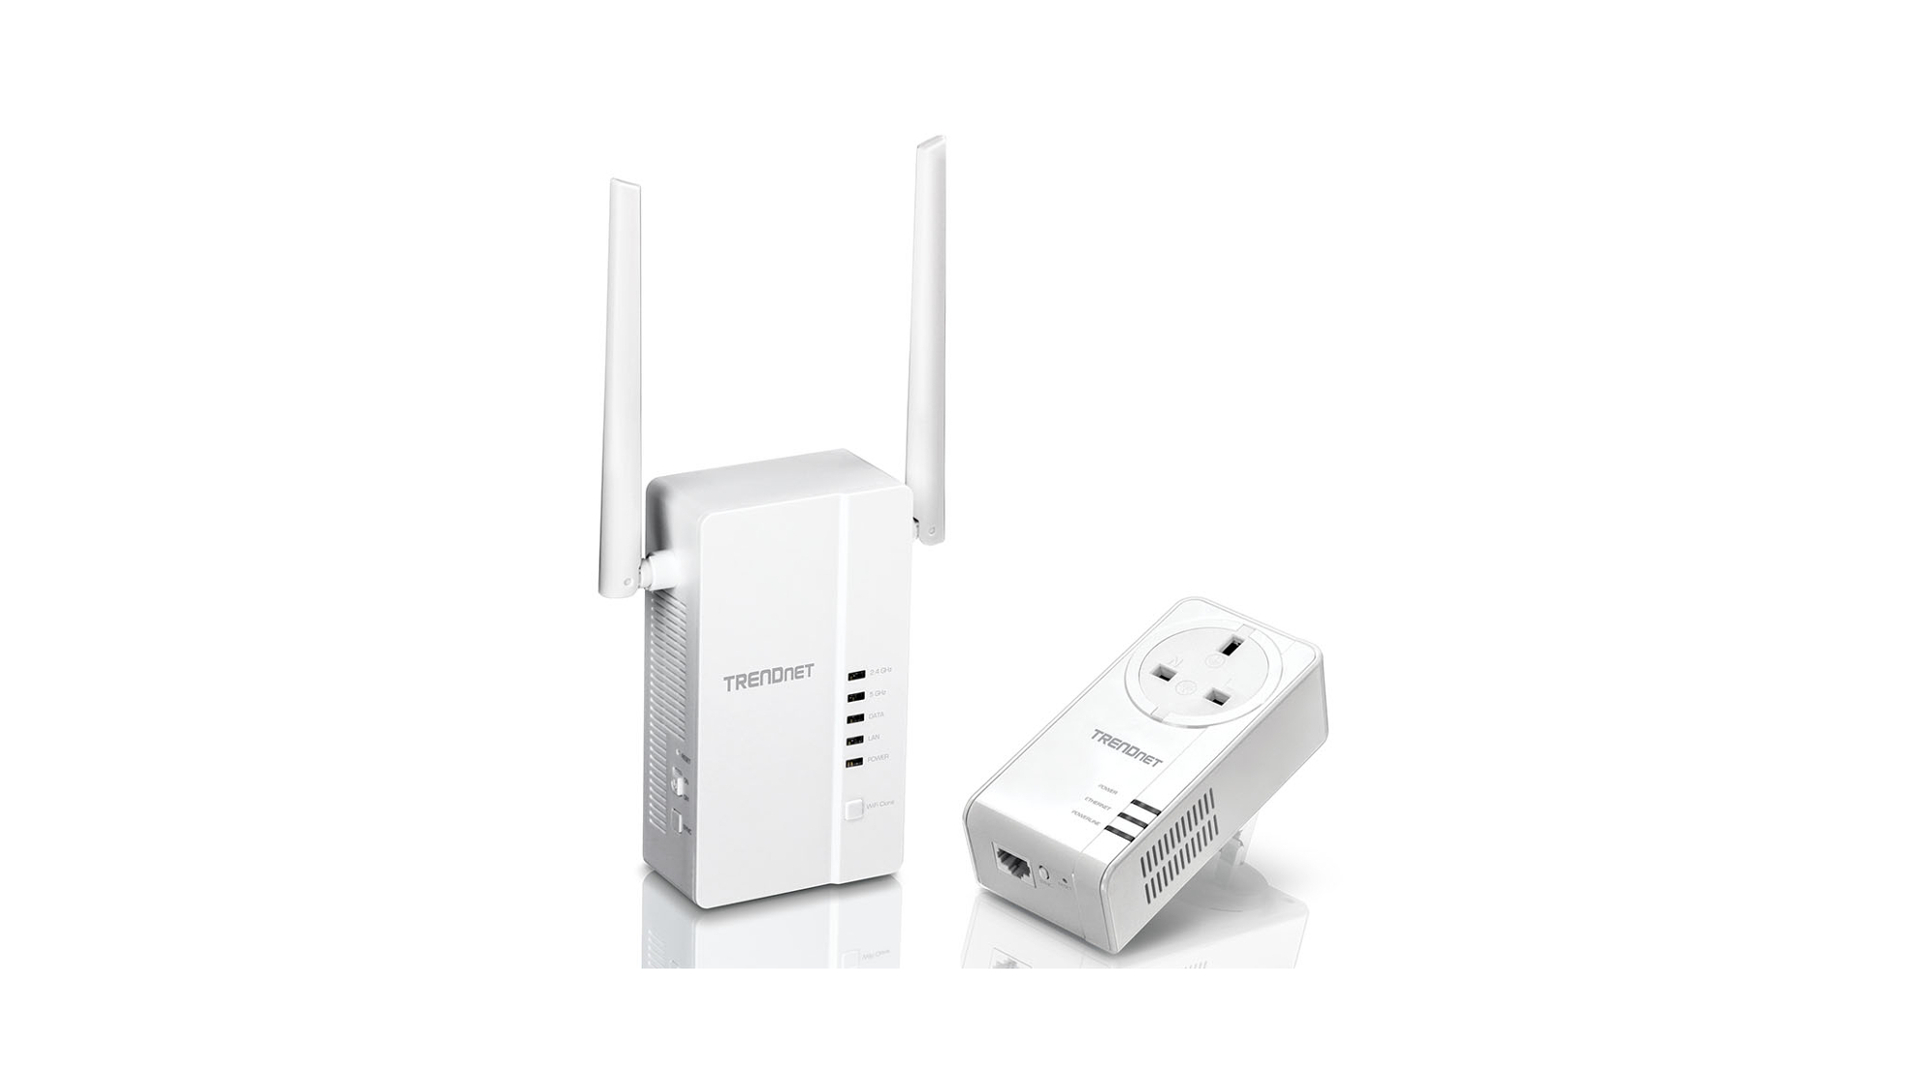 Asus 1200Mbps AV2 1200 Wi-Fi Powerline Adapter Review